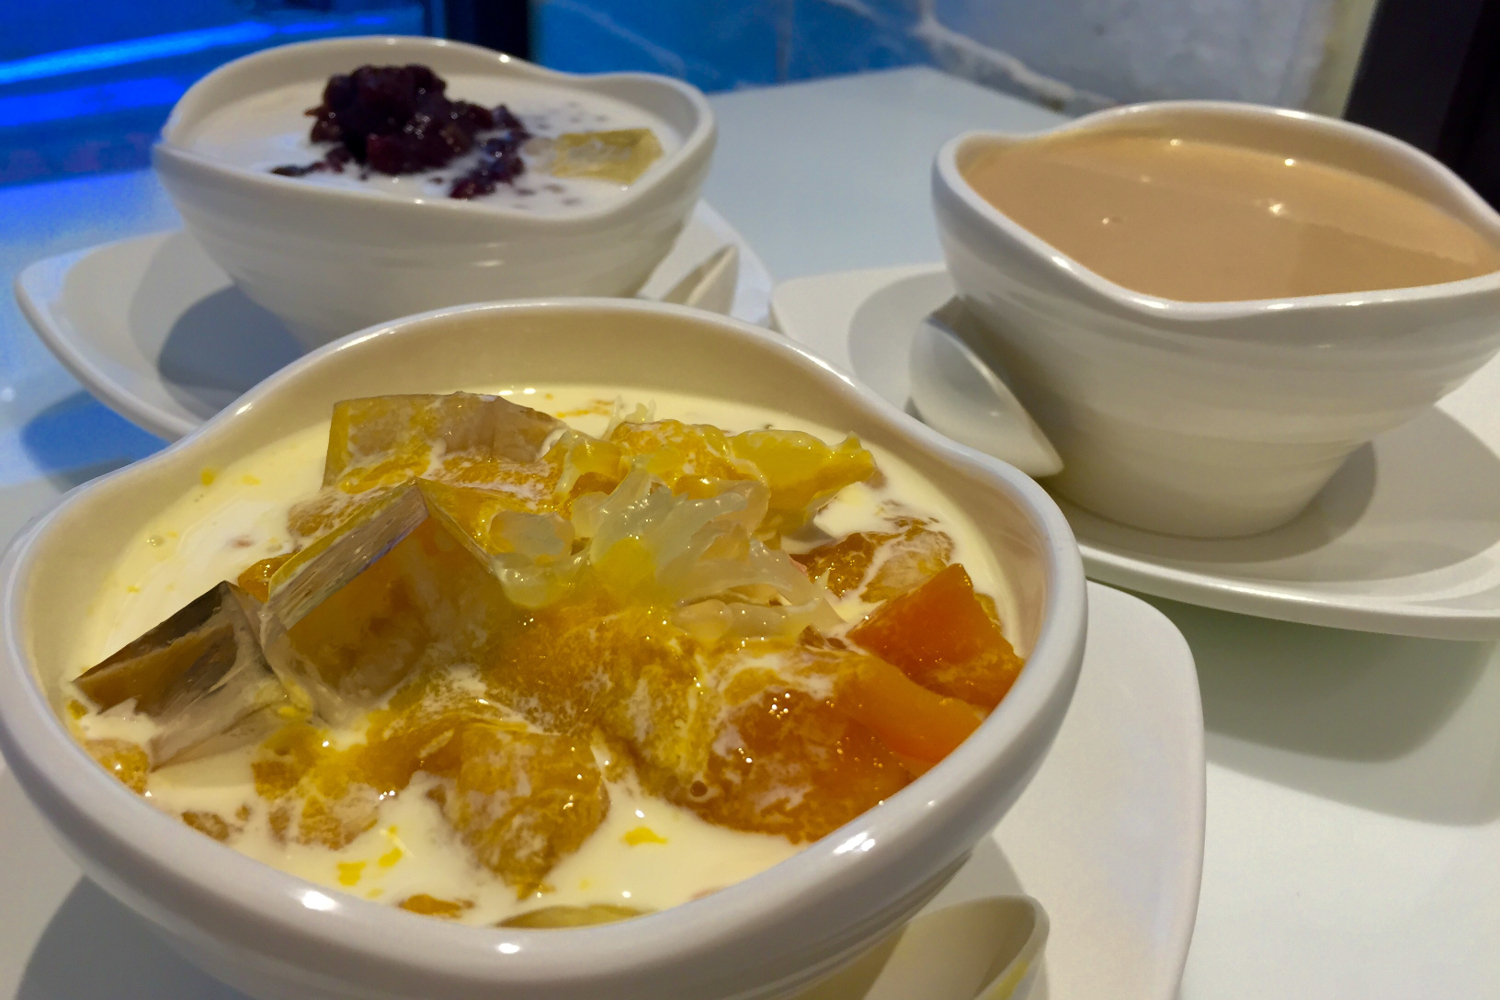 Sweet soup: mango pomelo sago, cashew, tofu pudding with red bean paste. Image by Piera Chen / londoninfopage